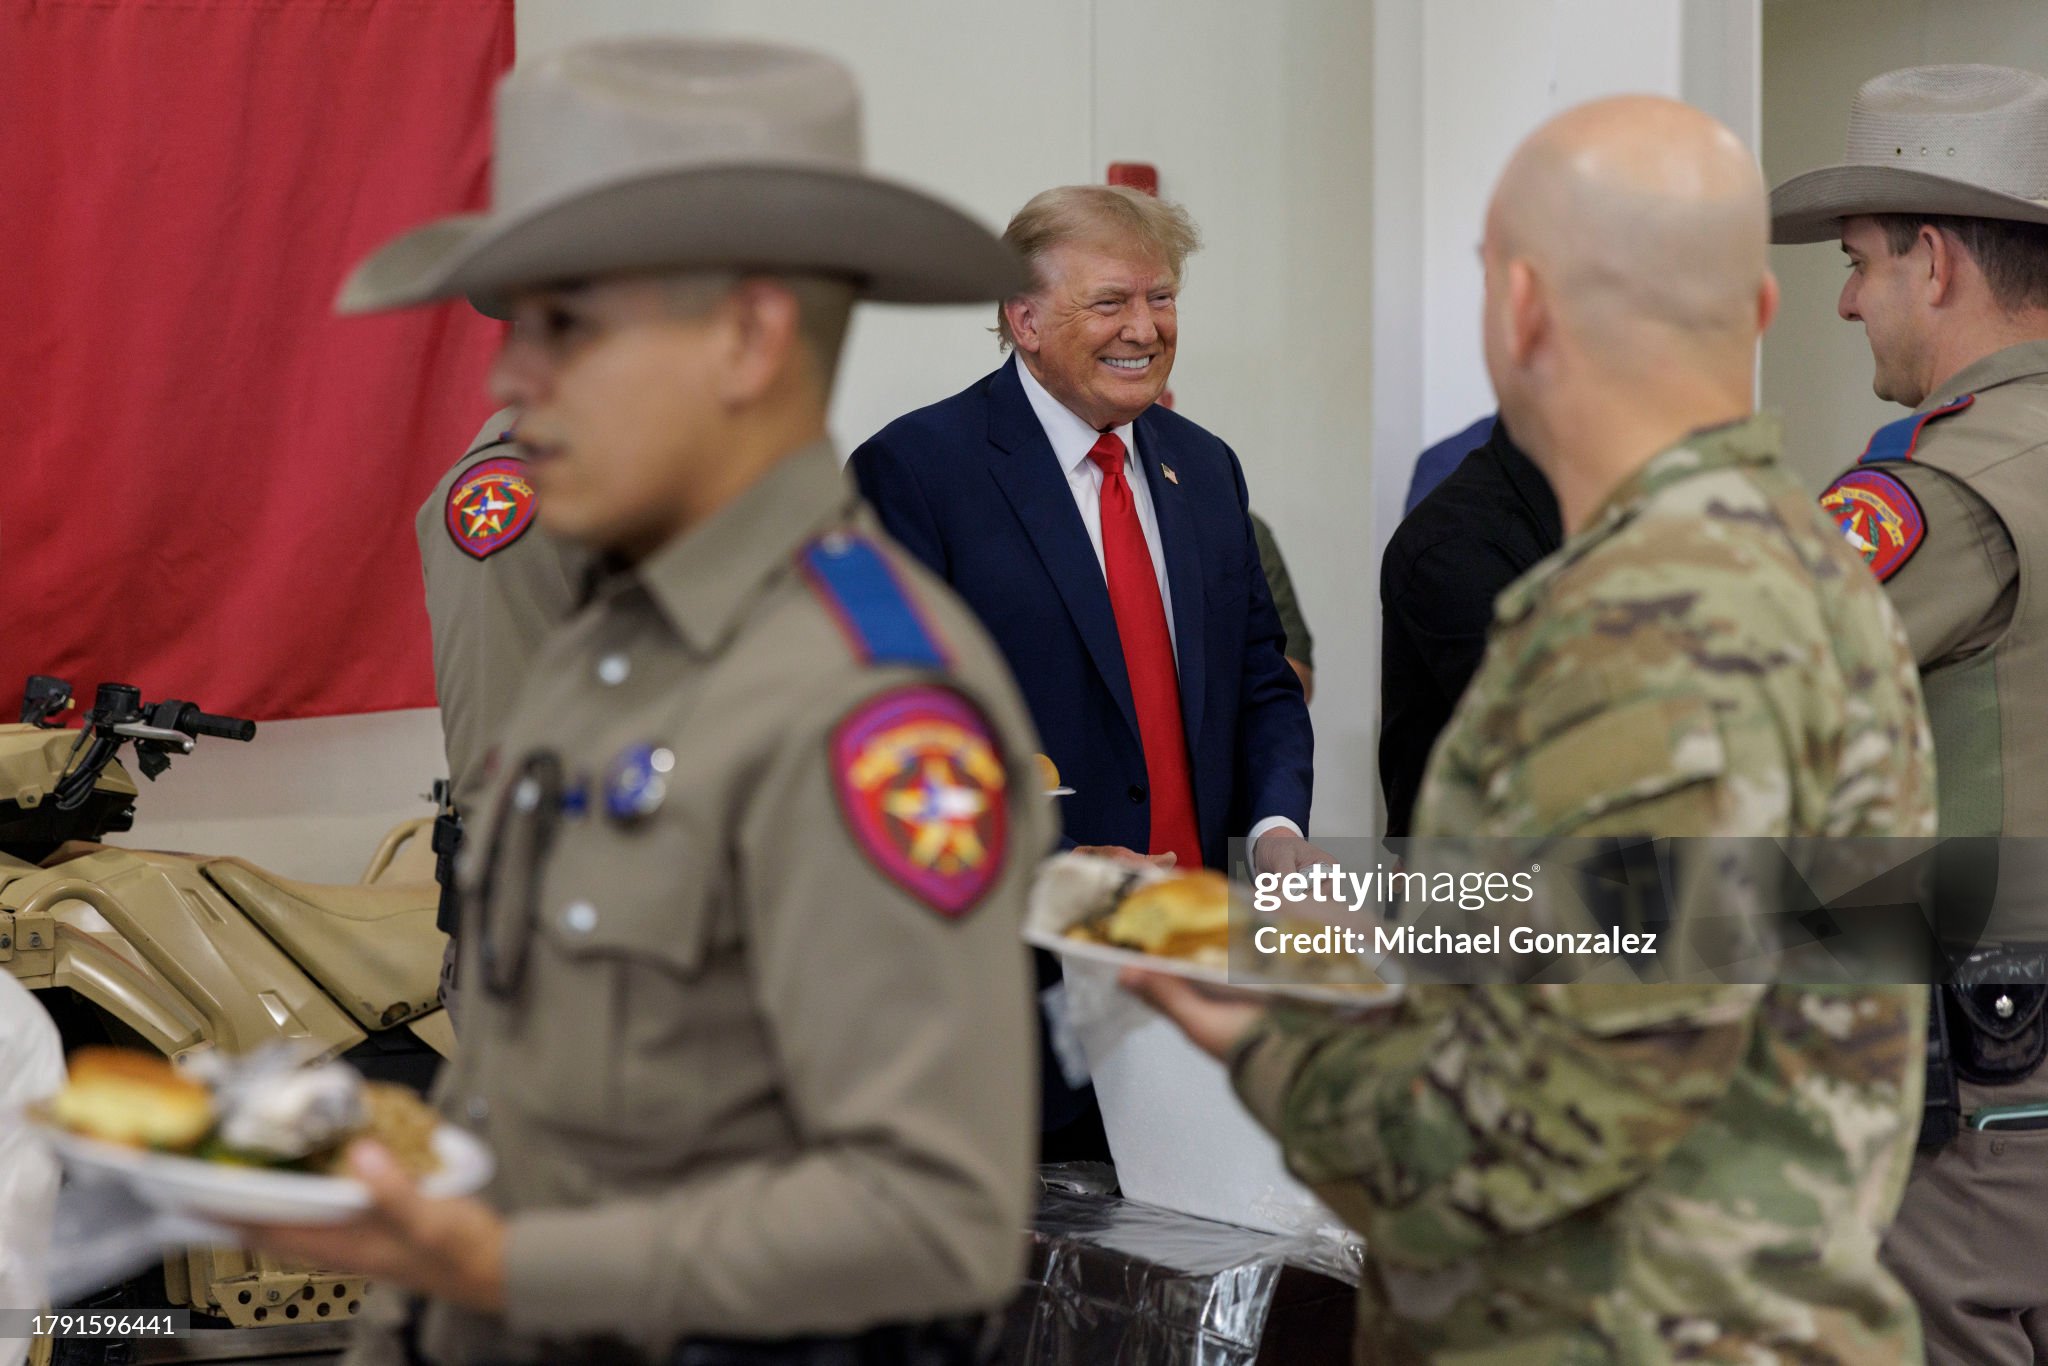 former-president-trump-visits-the-southern-border-with-texas-governor-abbott.jpg